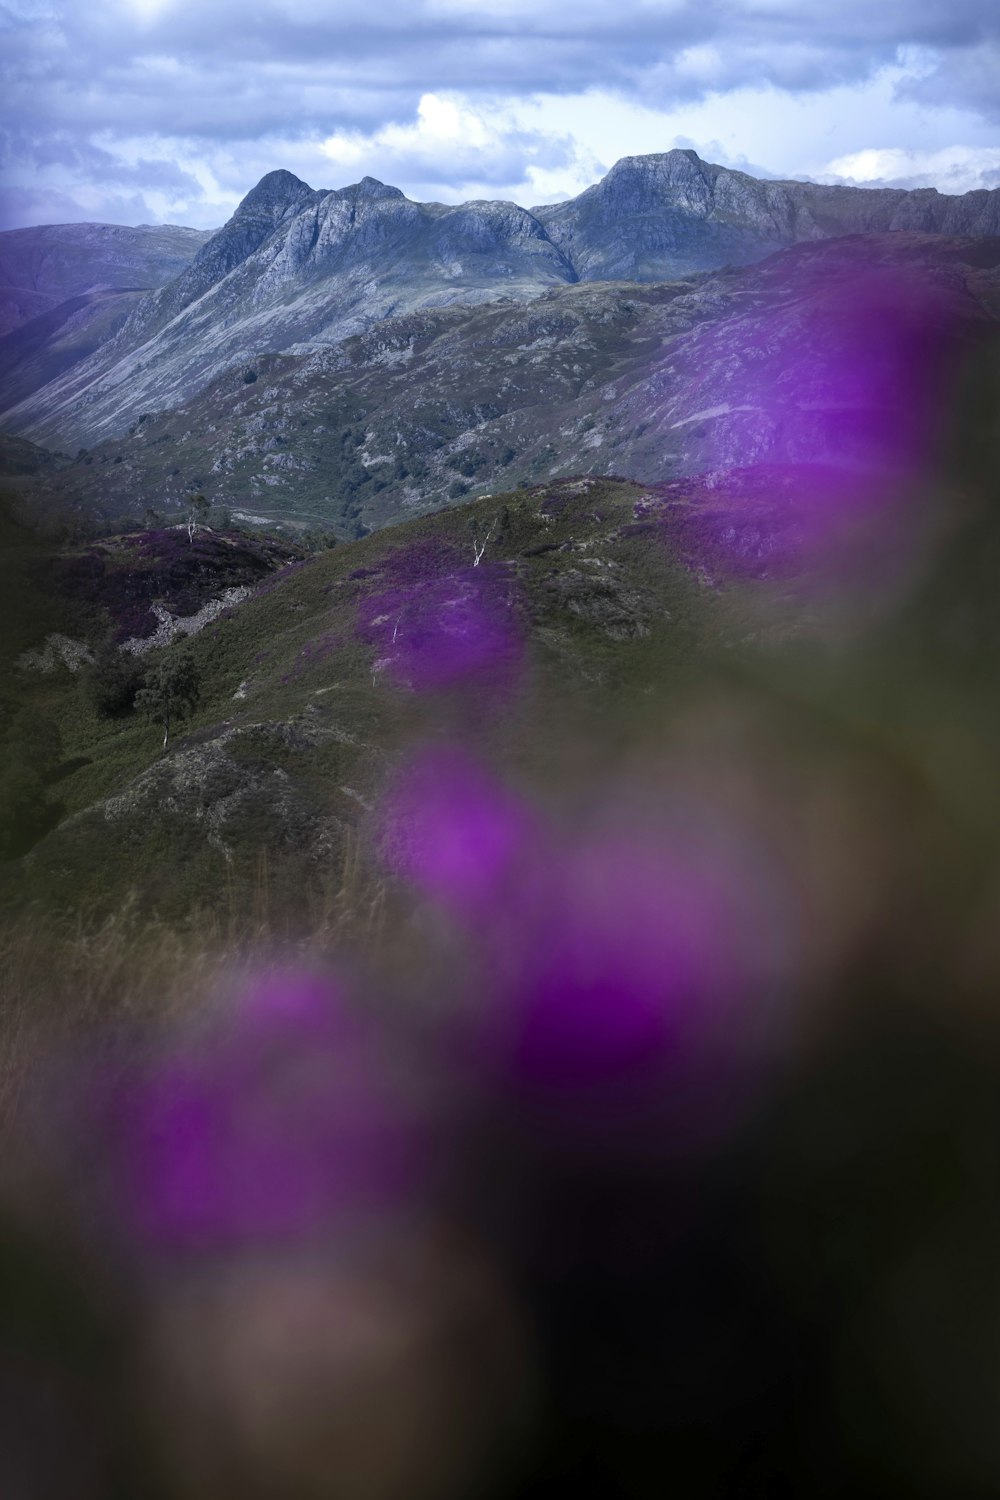 a purple flower in the foreground with a mountain in the background